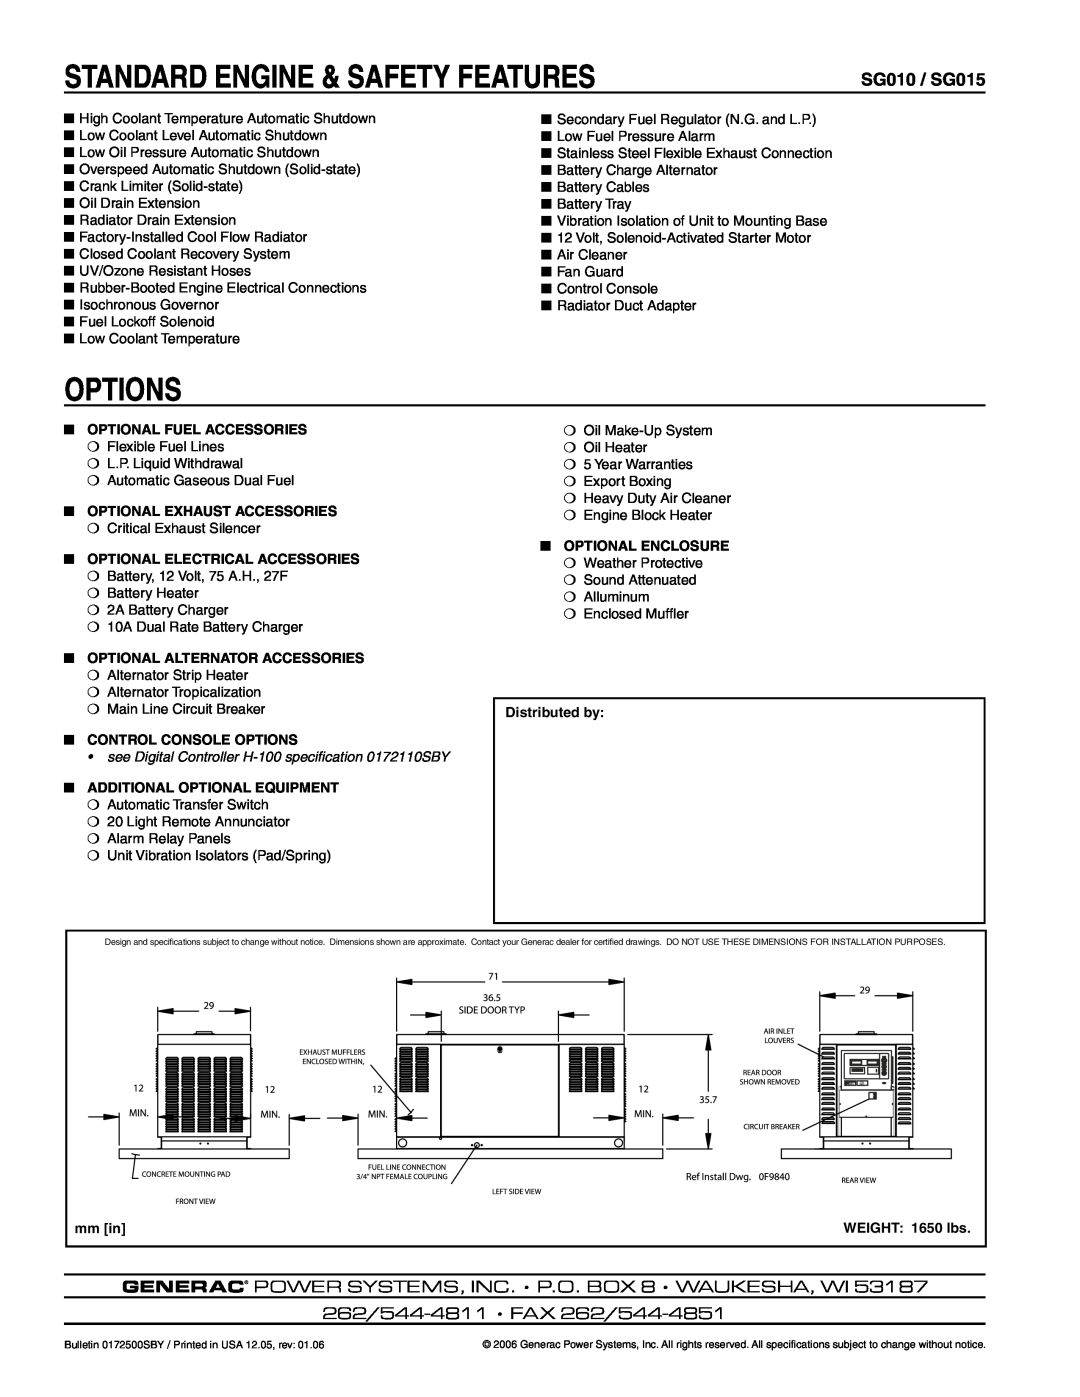 Generac Power Systems manual Standard Engine & Safety Features, Options, SG010 / SG015, 262/544-4811 FAX 262/544-4851 